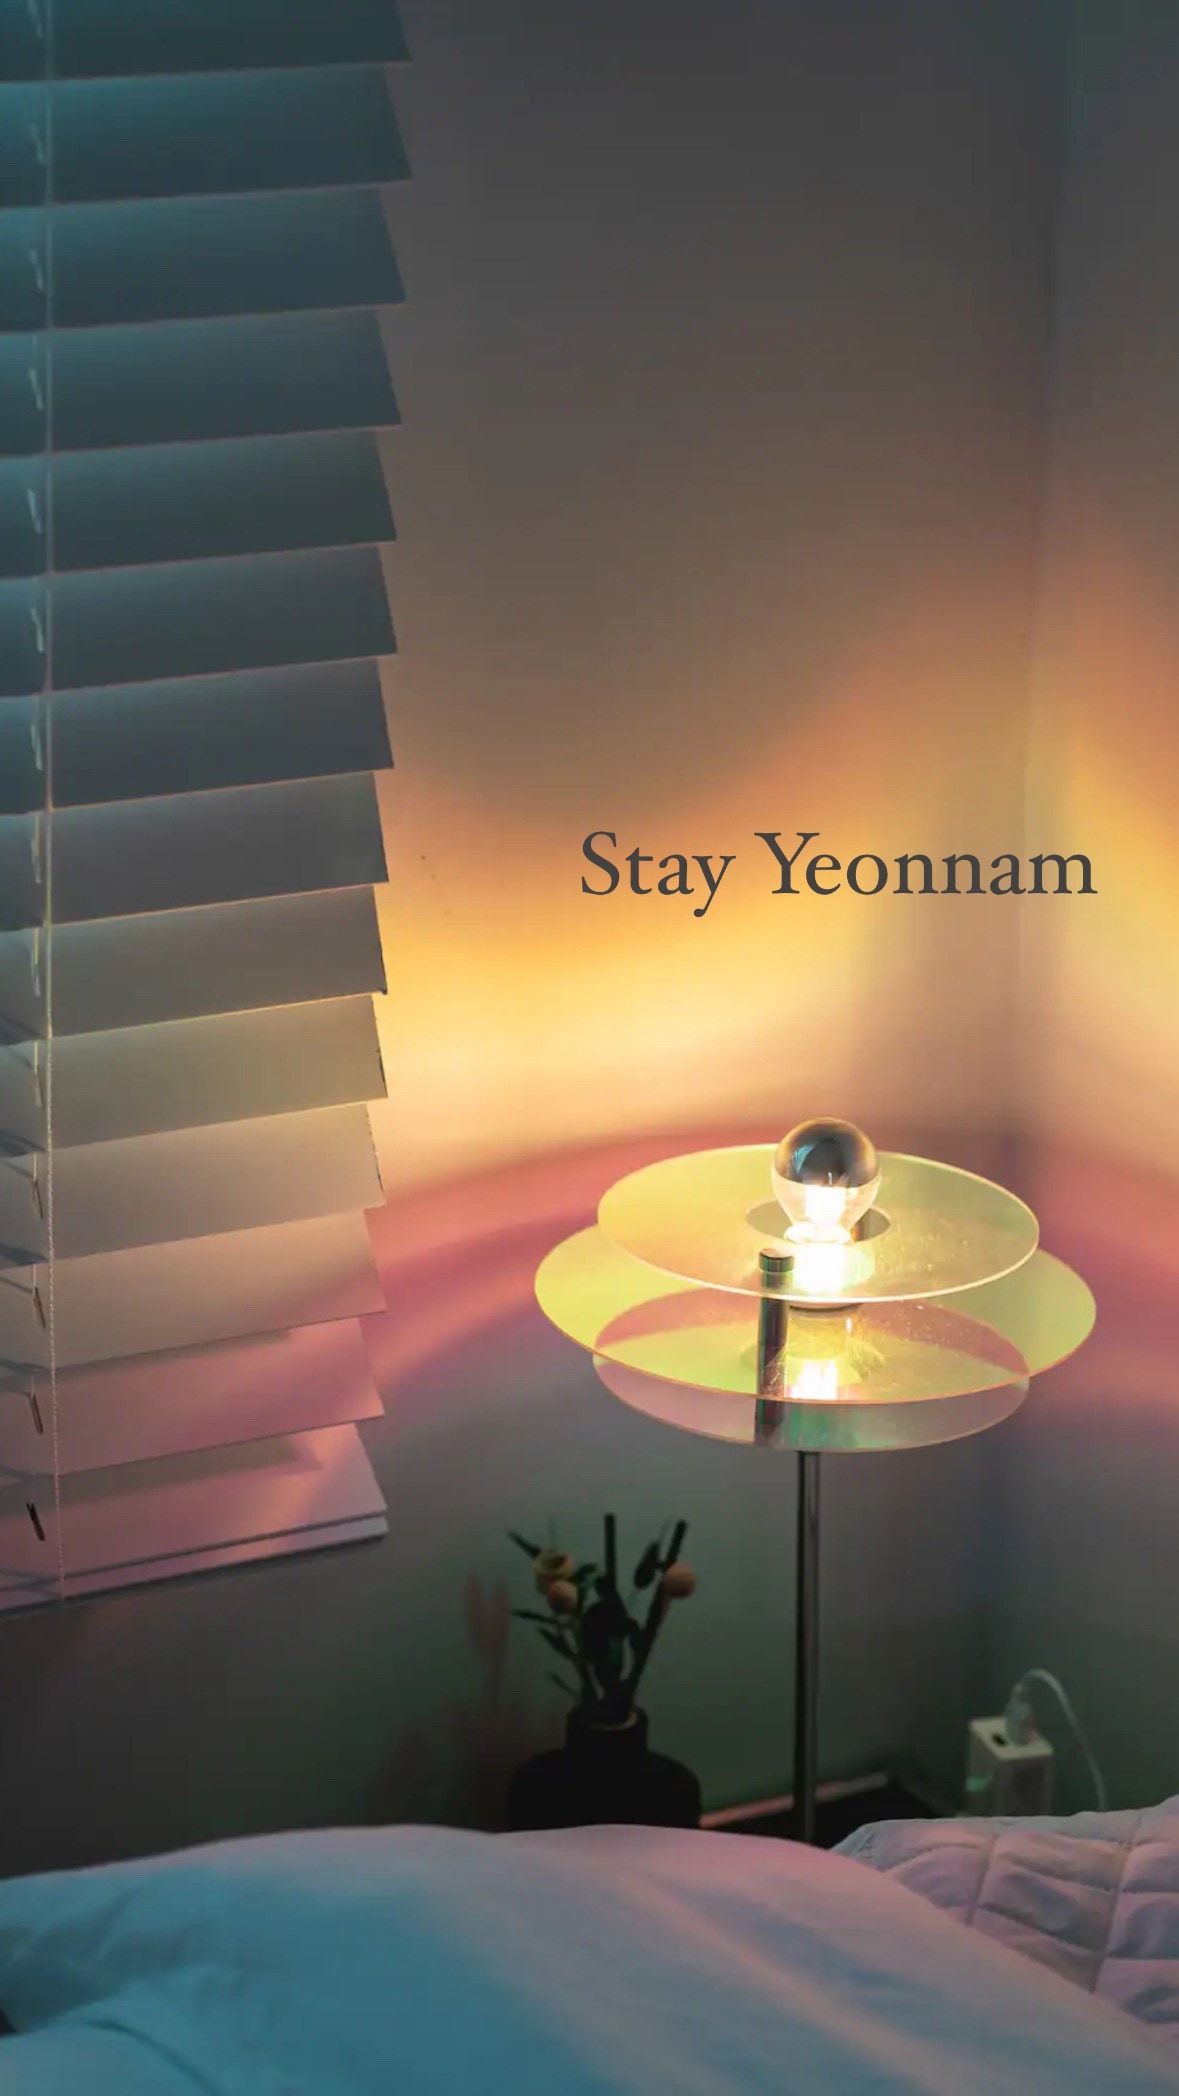 Stay Yeonnam(2RM 2Bth) free airport pickup